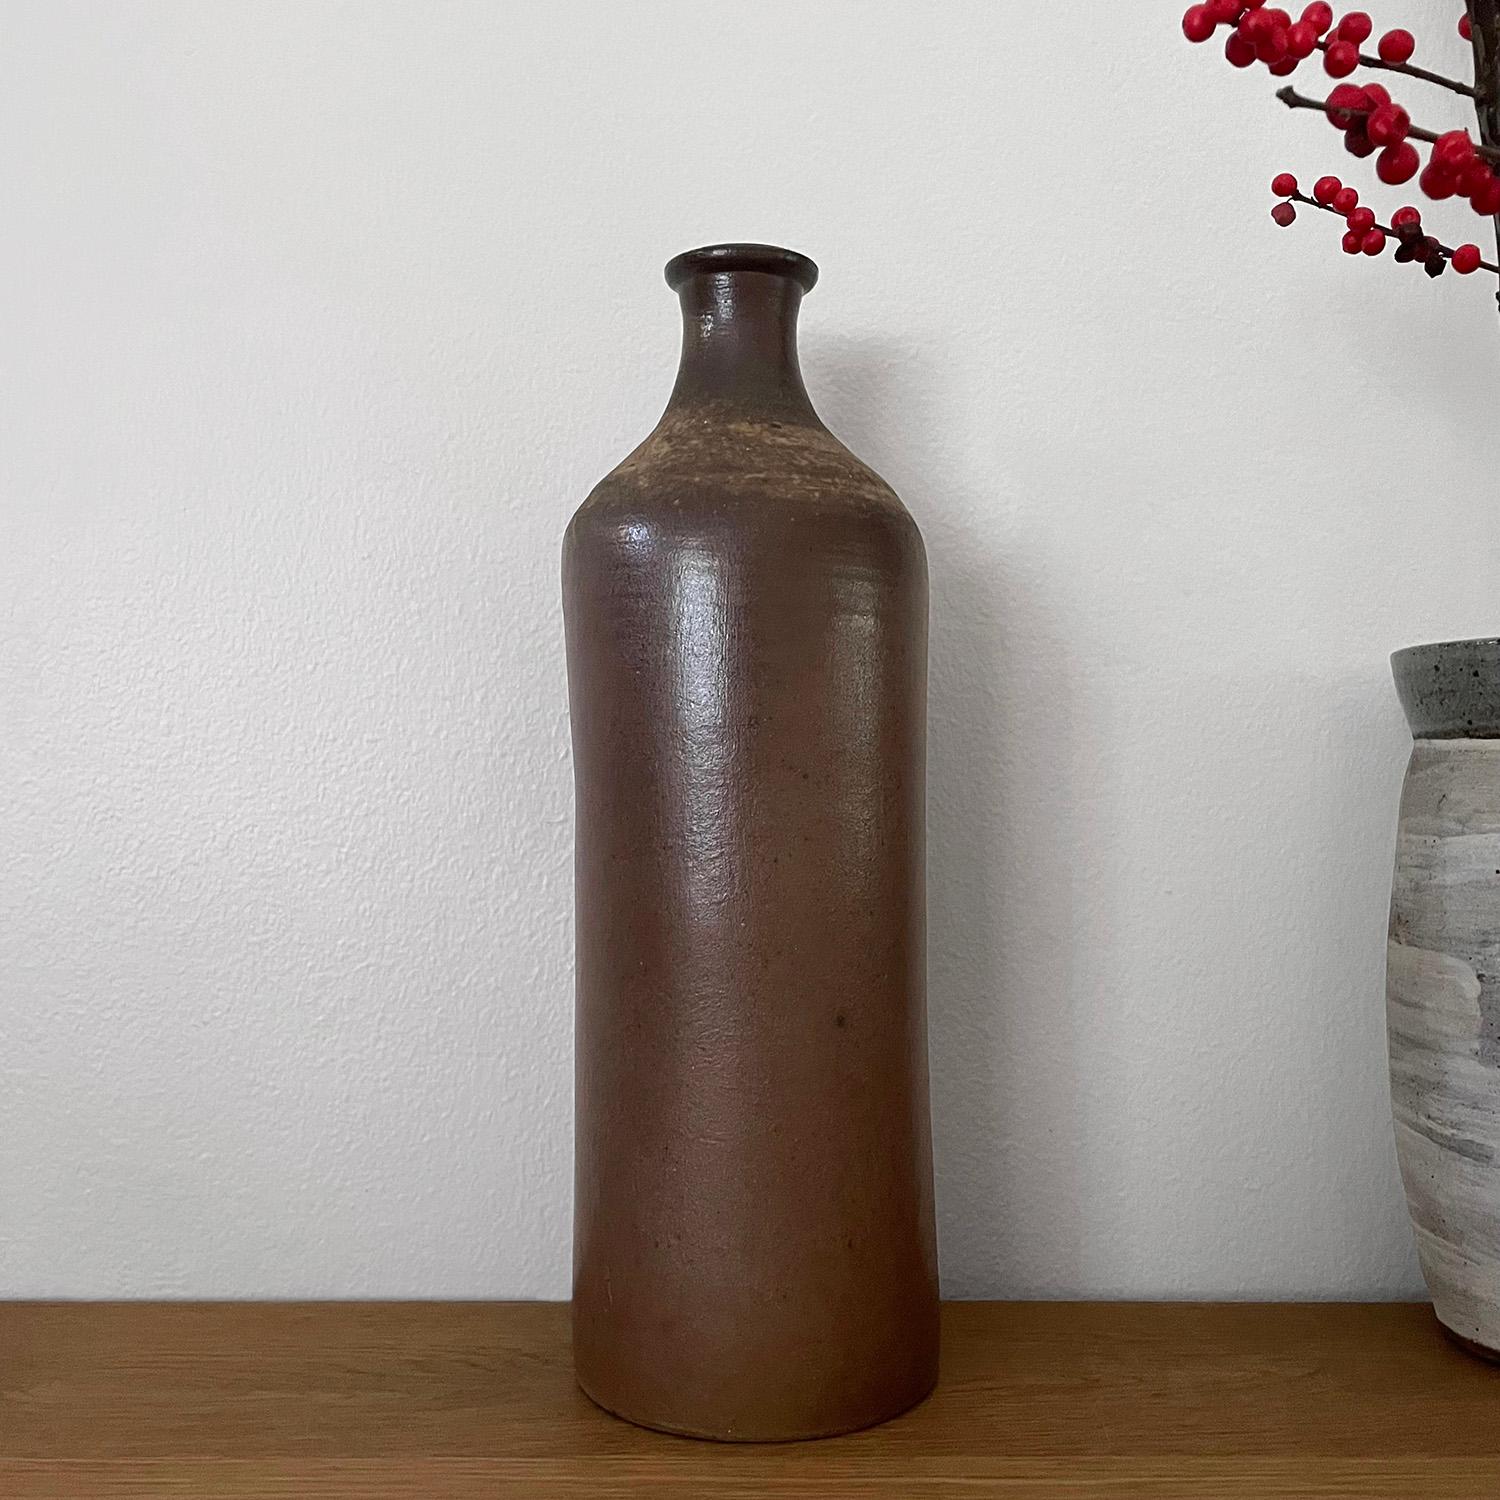 French ceramic stoneware bottle vase
Neutral toned ceramic stoneware ceramic bottle 
Organic composition and feel
This large bottle is grand in scale and substantial enough to hold a sunflower 
Vessel has not been tested to hold water
Patina from